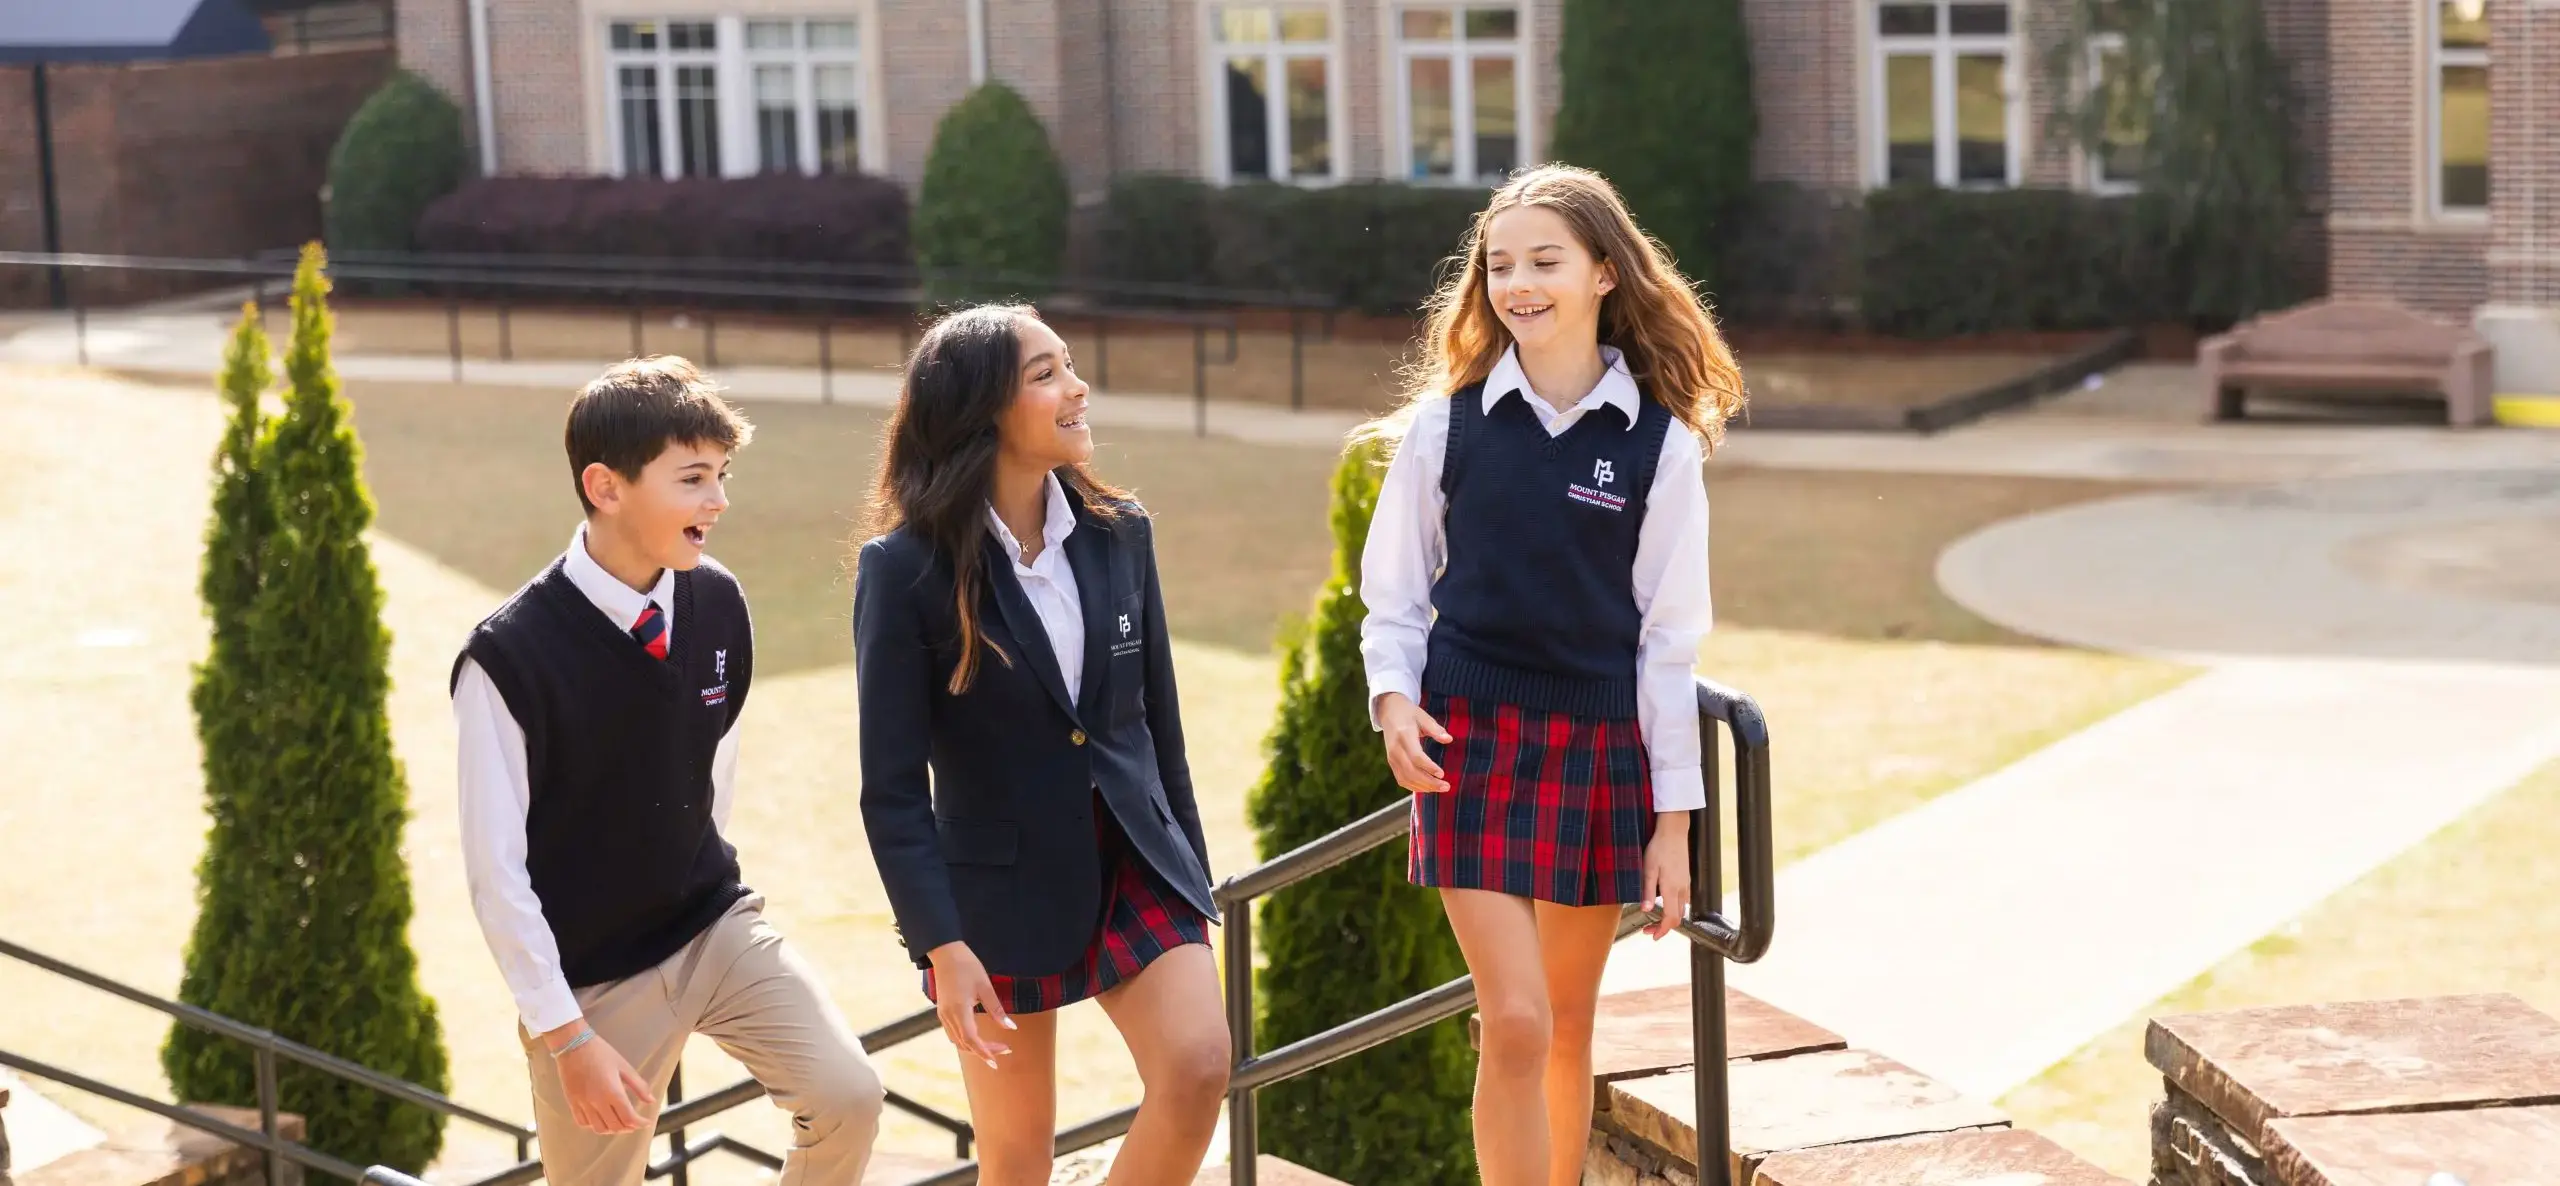 Three students walking outside, smiling